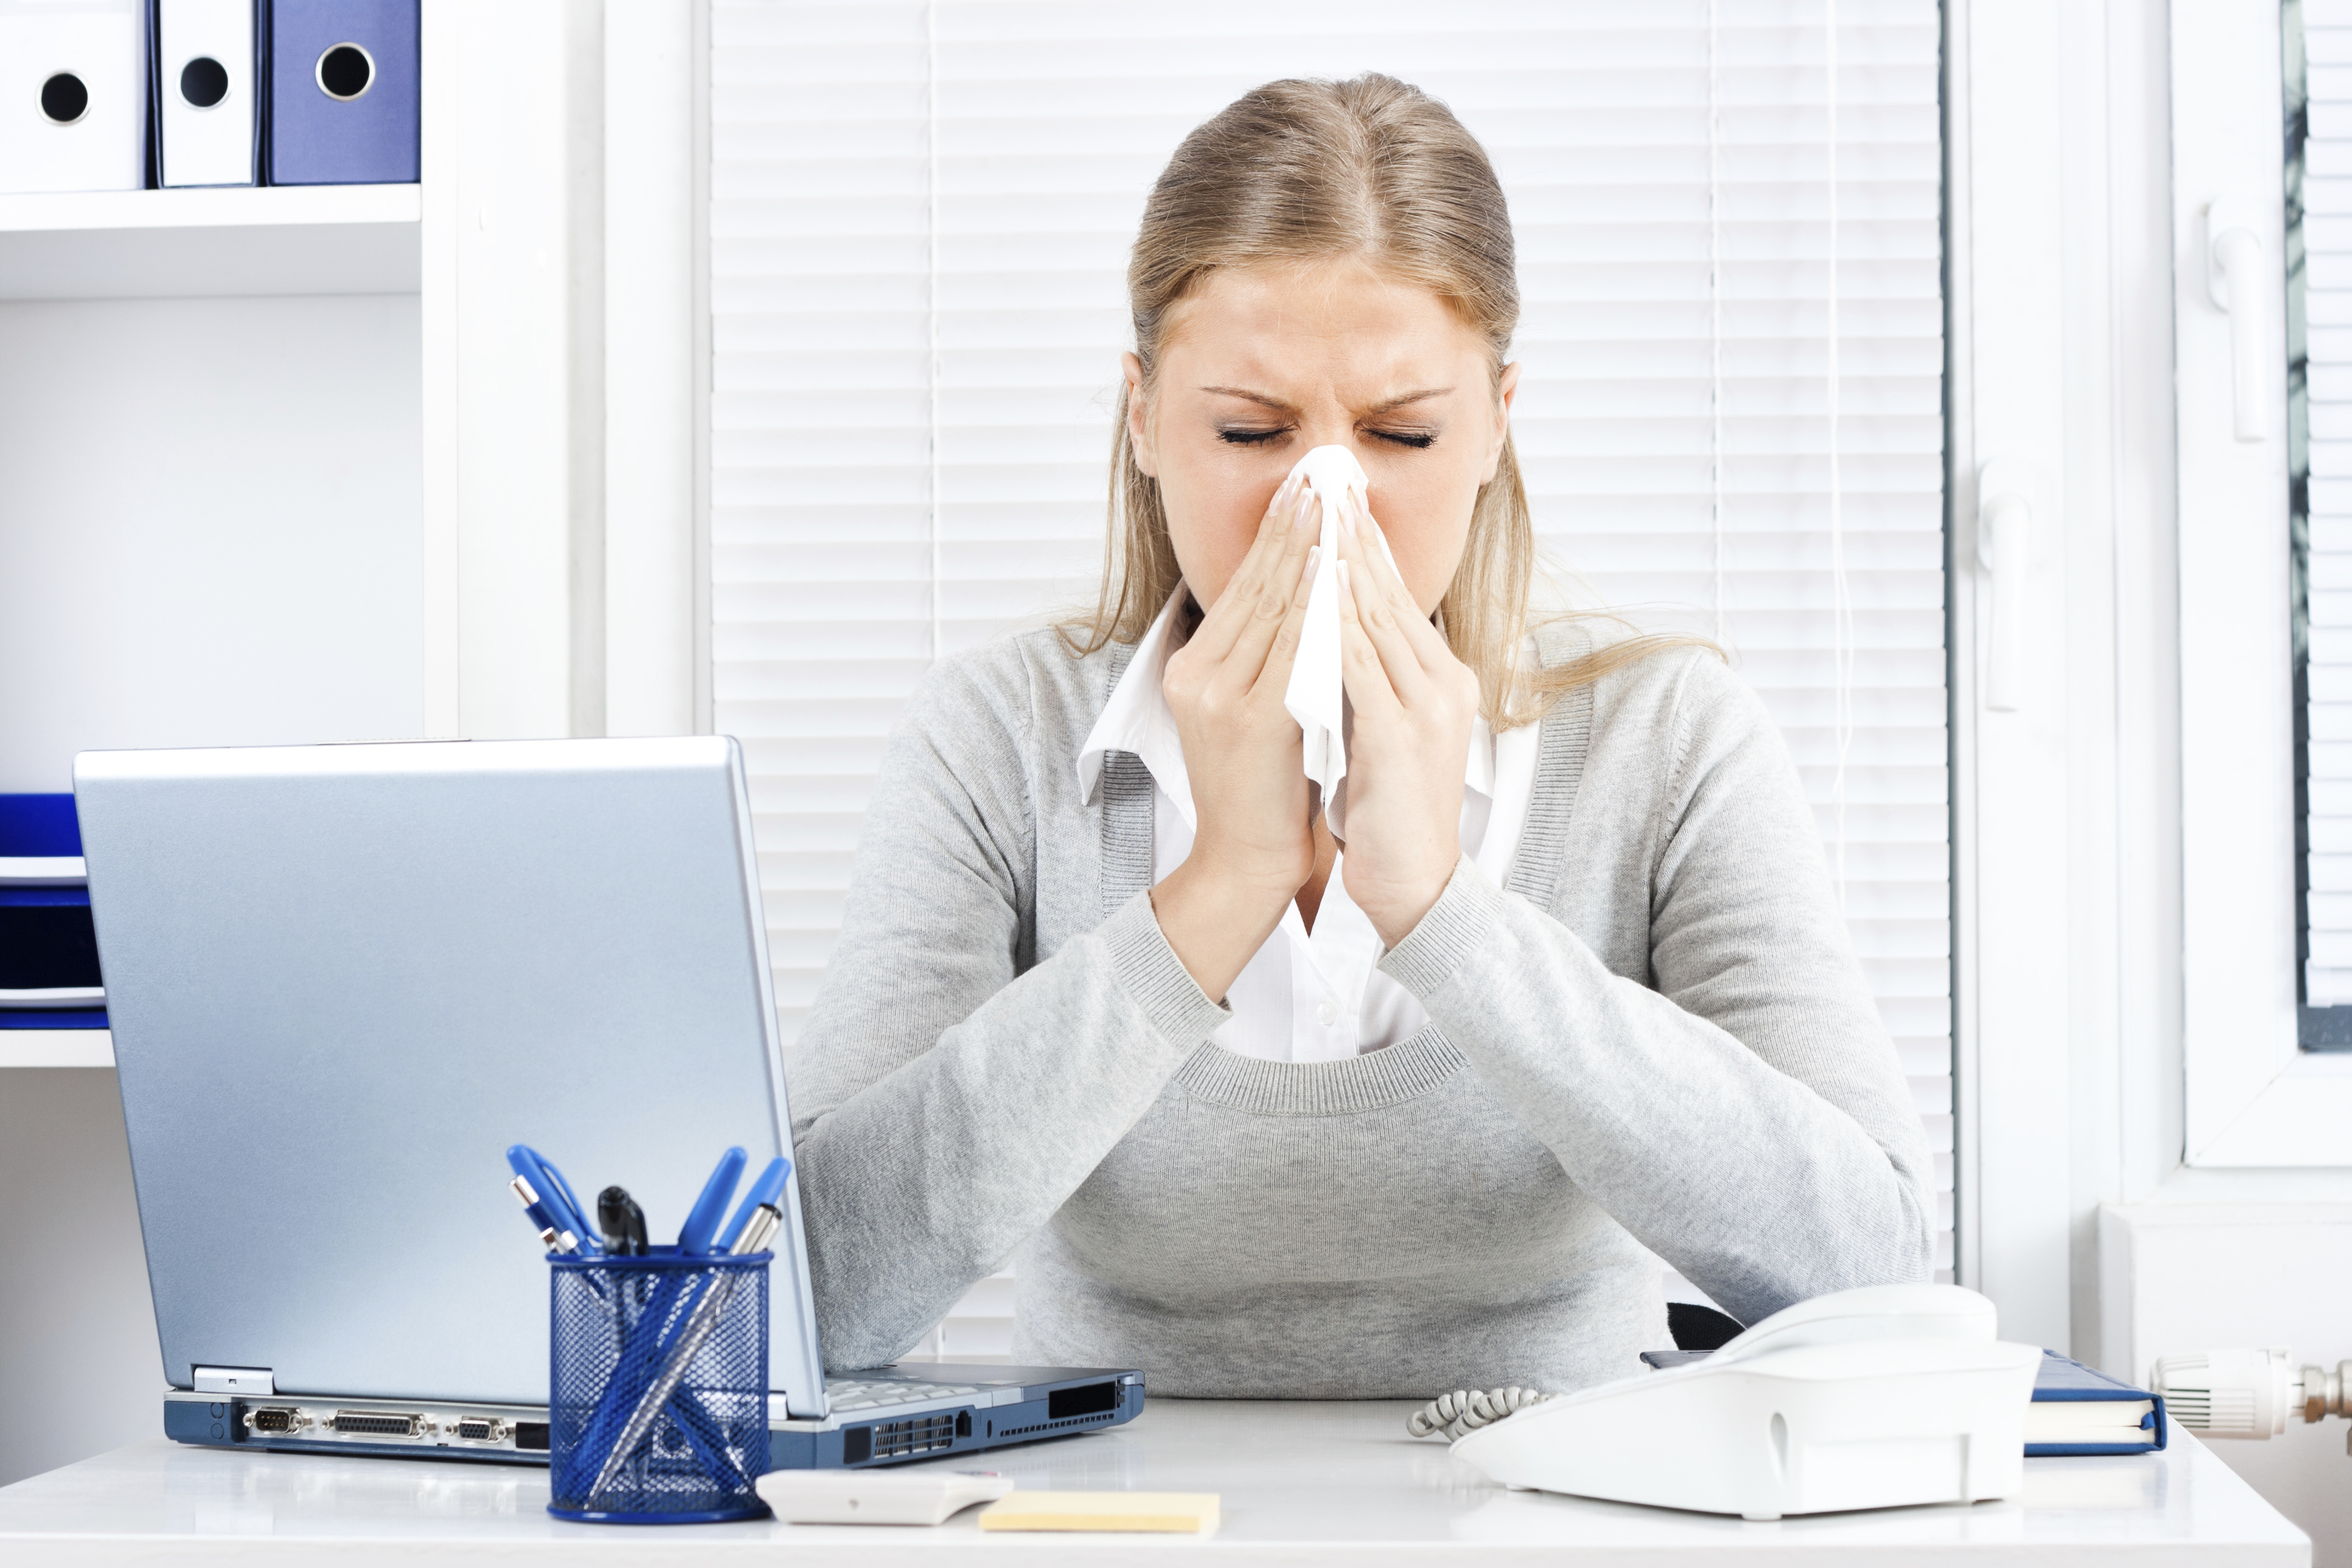 Tips on office courtesy during cold and flu season